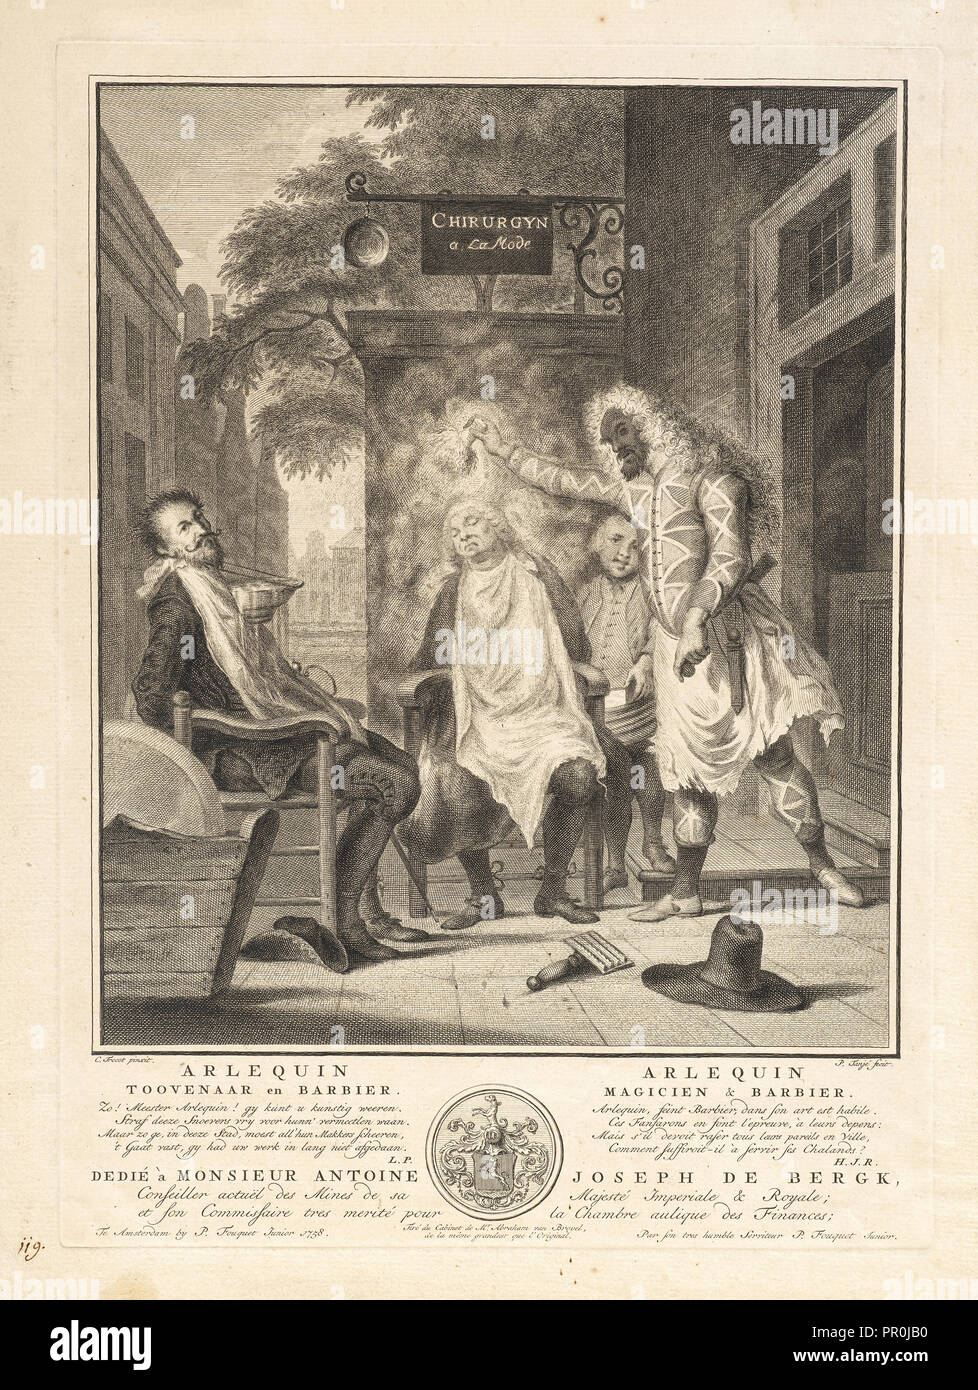 Arlequin magicien and barbier, Italian theater prints, 1758 Stock Photo